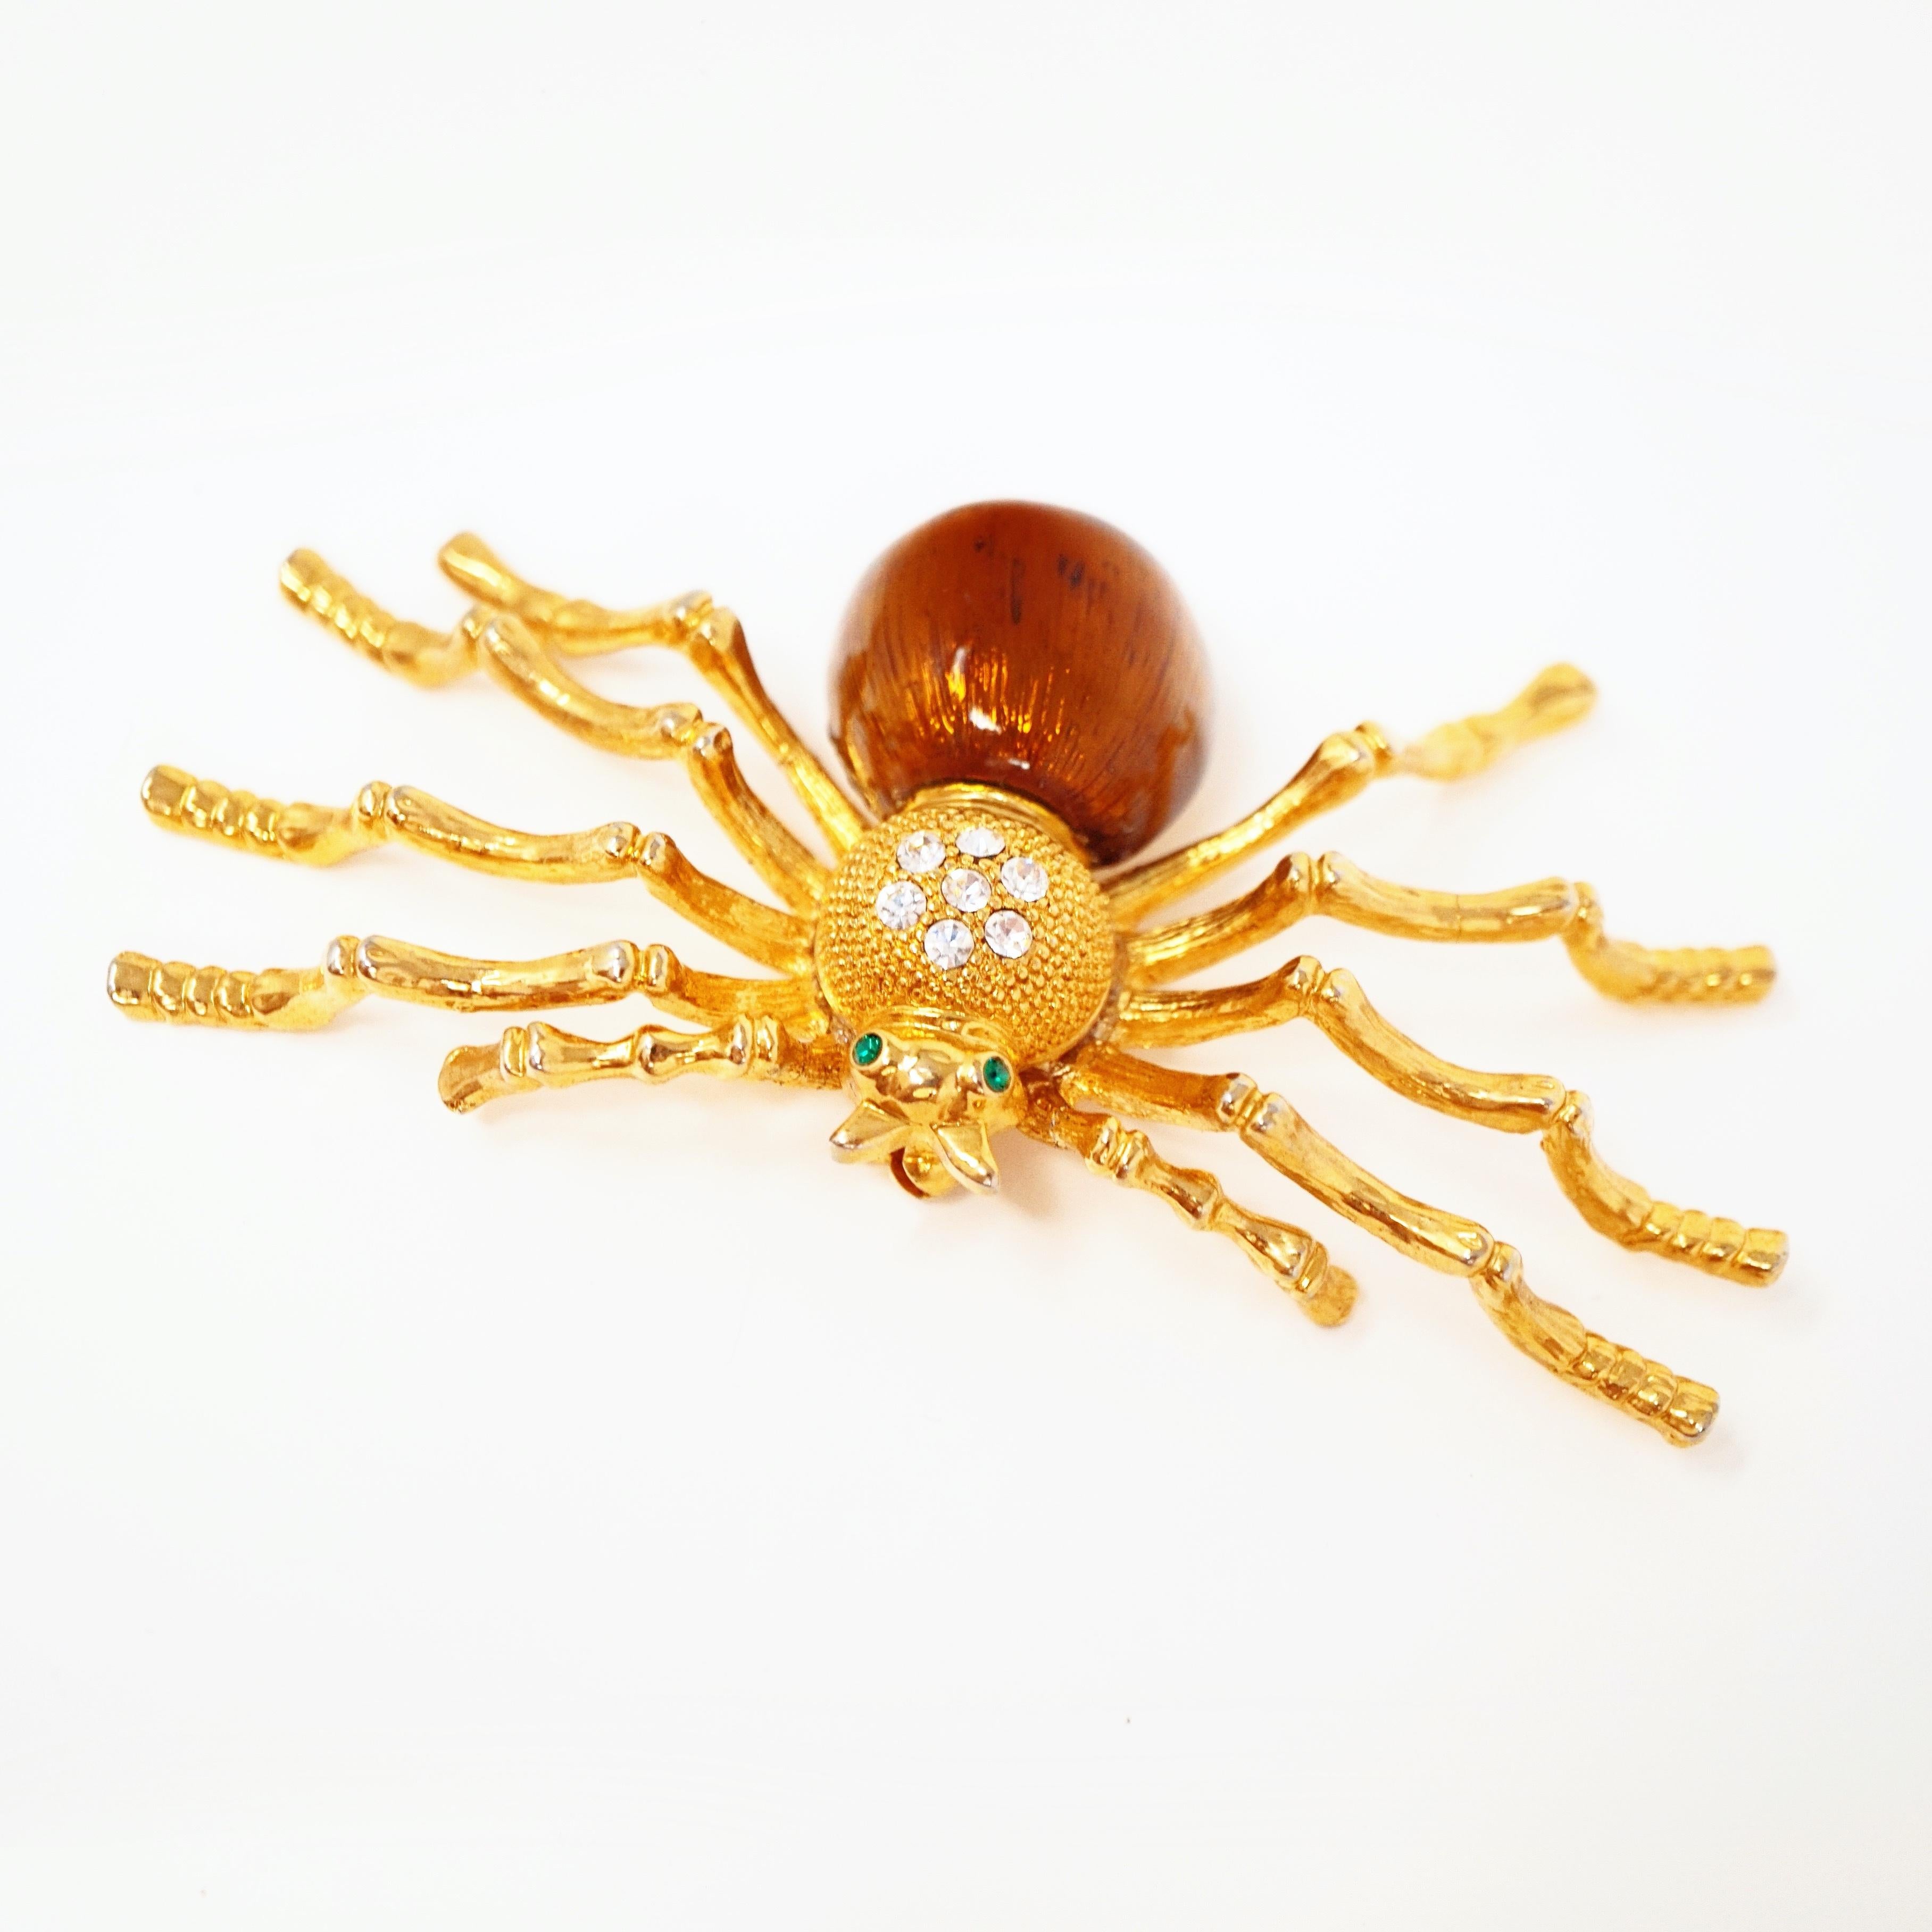 1980s Oversized Spider Gilt & Enamel Statement Costume Brooch with Rhinestones In Excellent Condition For Sale In McKinney, TX